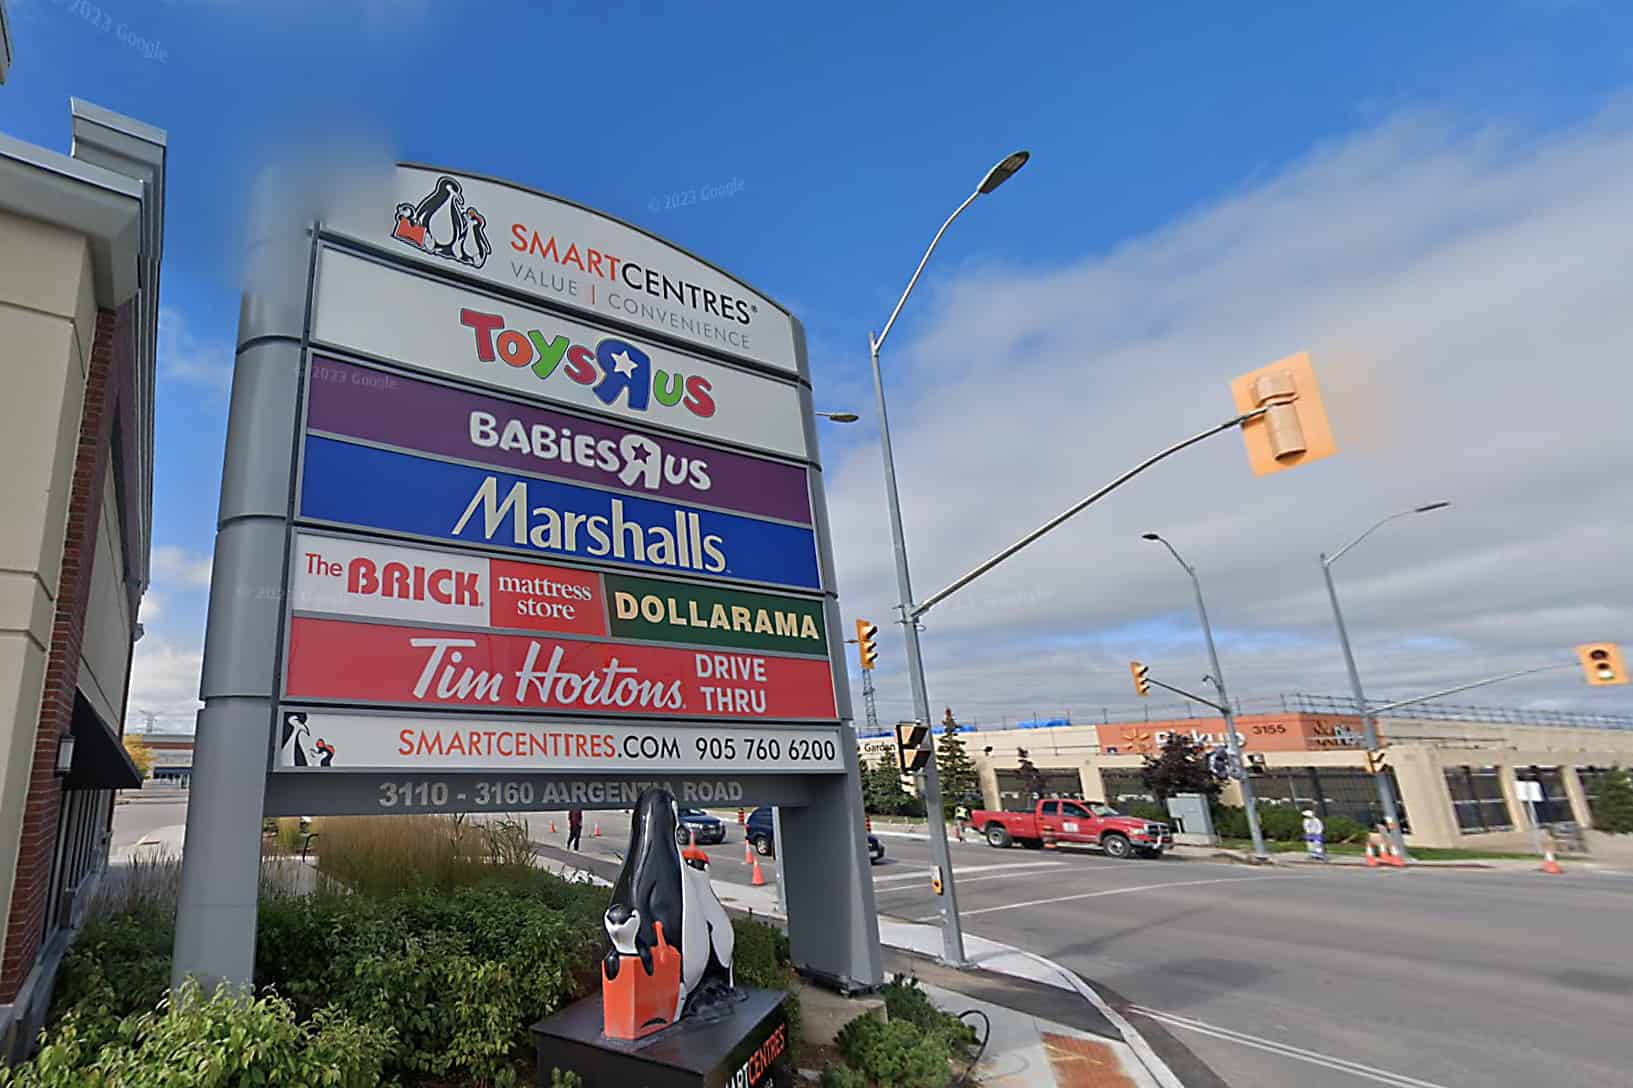 Folks oppose buying plaza conversion into residential growth in Mississauga